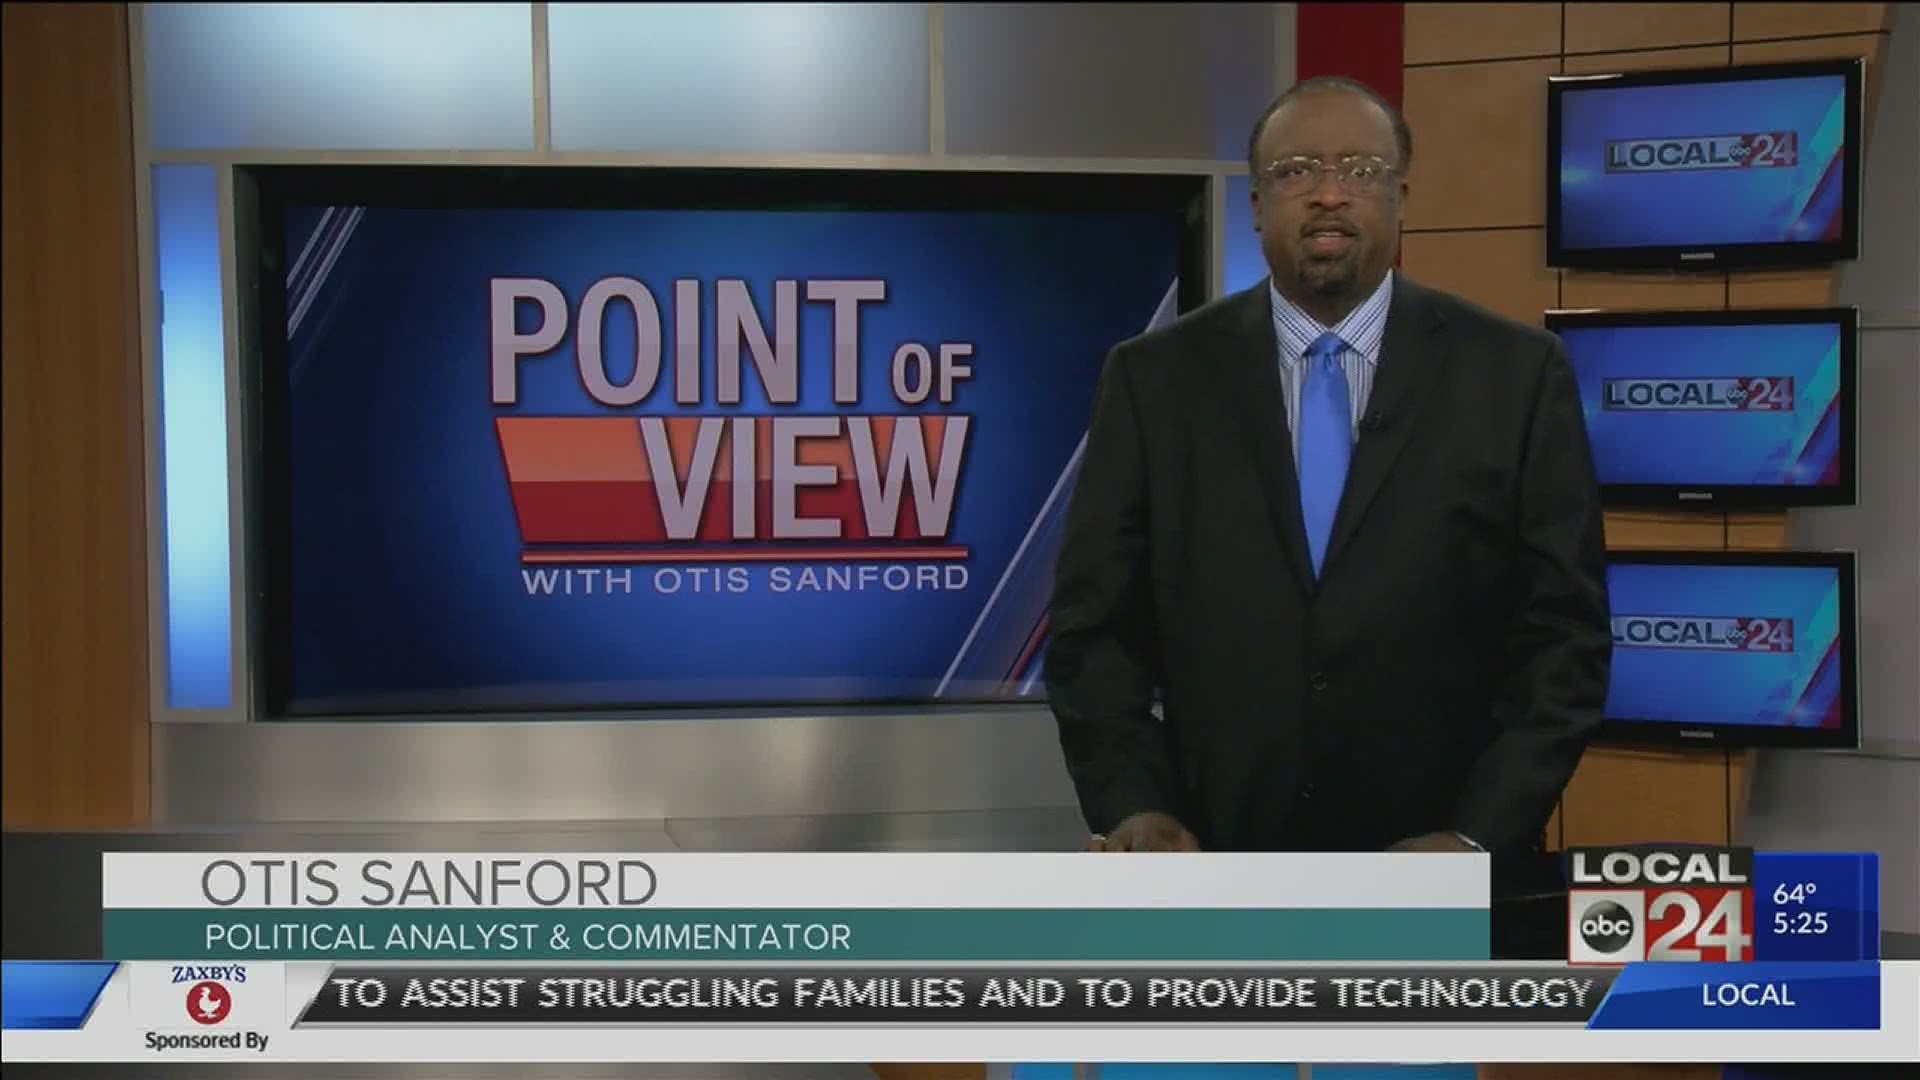 Local 24 News political analyst and commentator Otis Sanford shares his point of view on courage during COVID-19 outbreak.